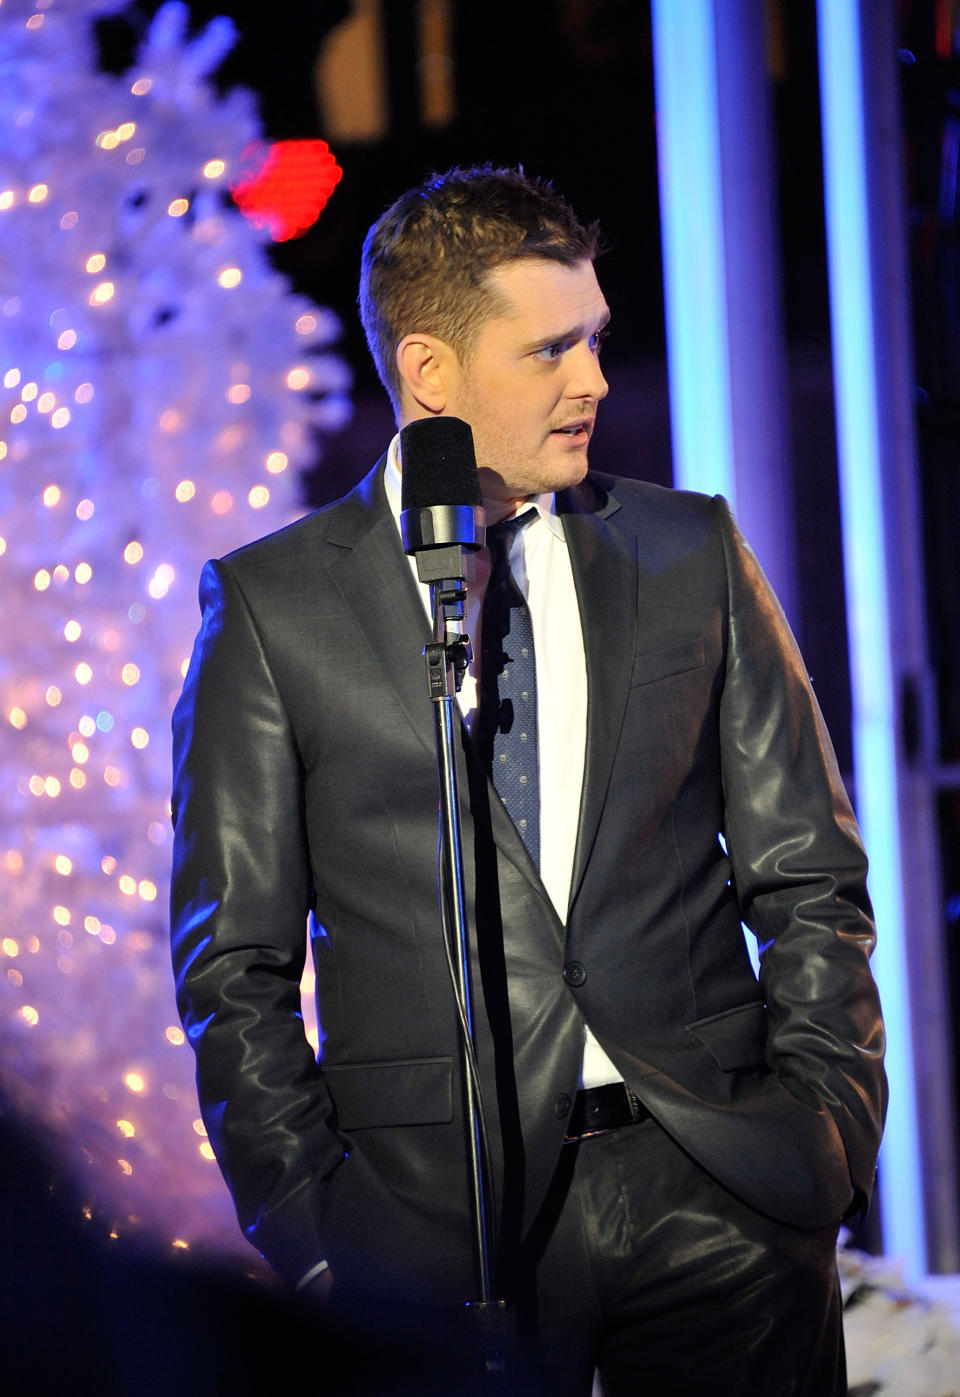 NEW YORK, NY - NOVEMBER 30: Singer Michael Buble performs at the Rockefeller Center Christmas Tree Lighting Party at Rock Center Cafe on November 30, 2011 in New York City. (Photo by Gary Gershoff/Getty Images for NBC)